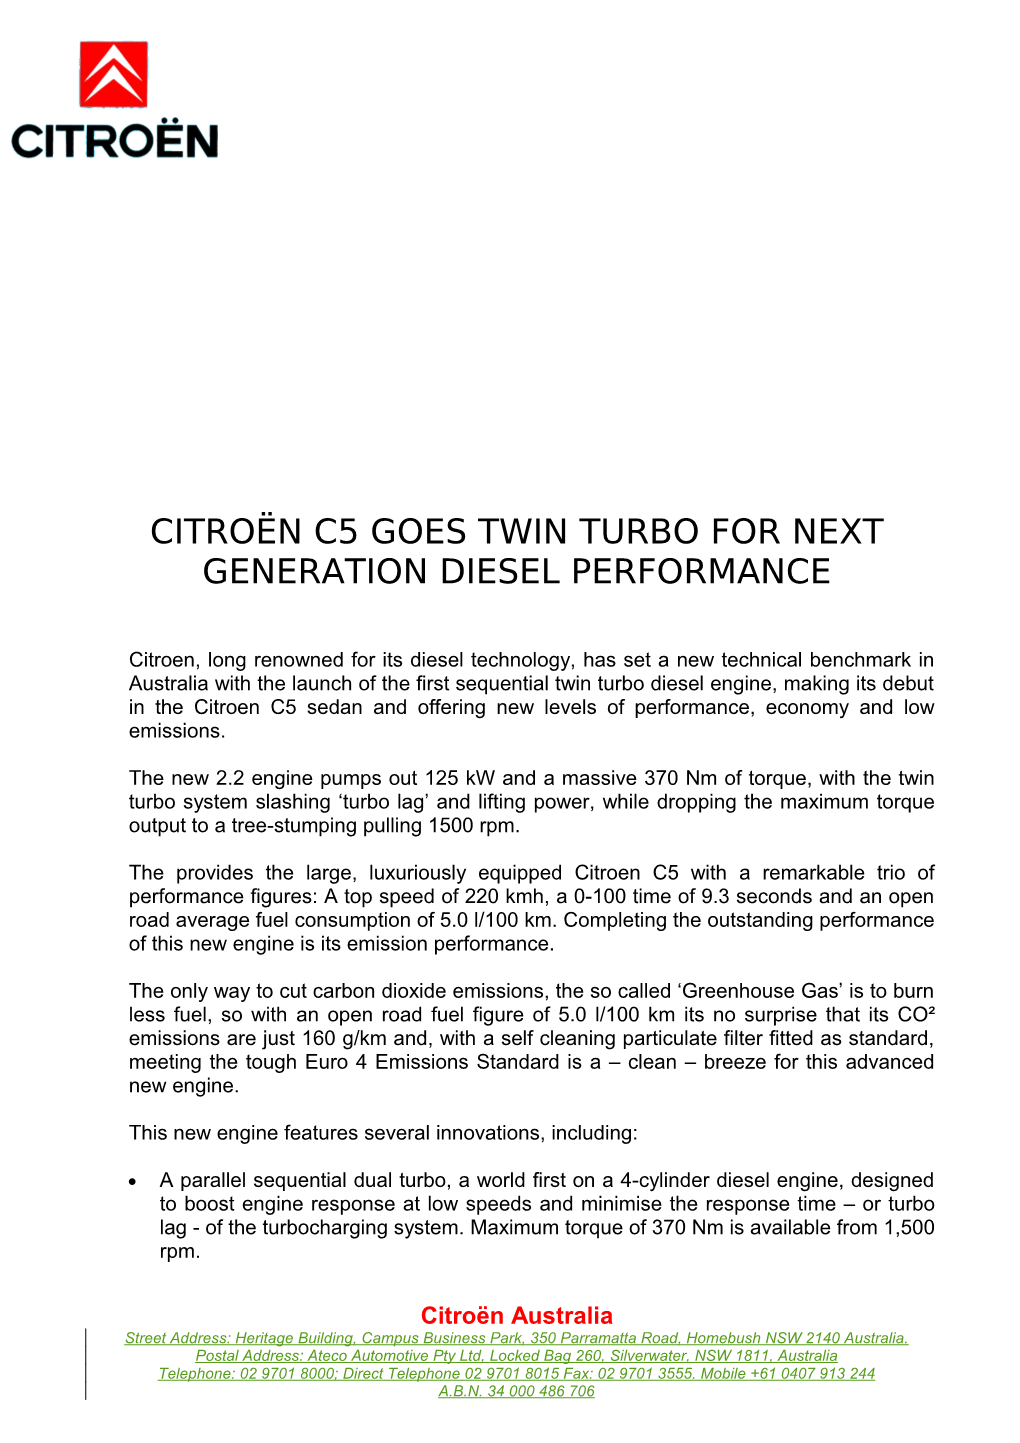 Citroën C5 Goes Twin Turbo for Next Generation Diesel Performance